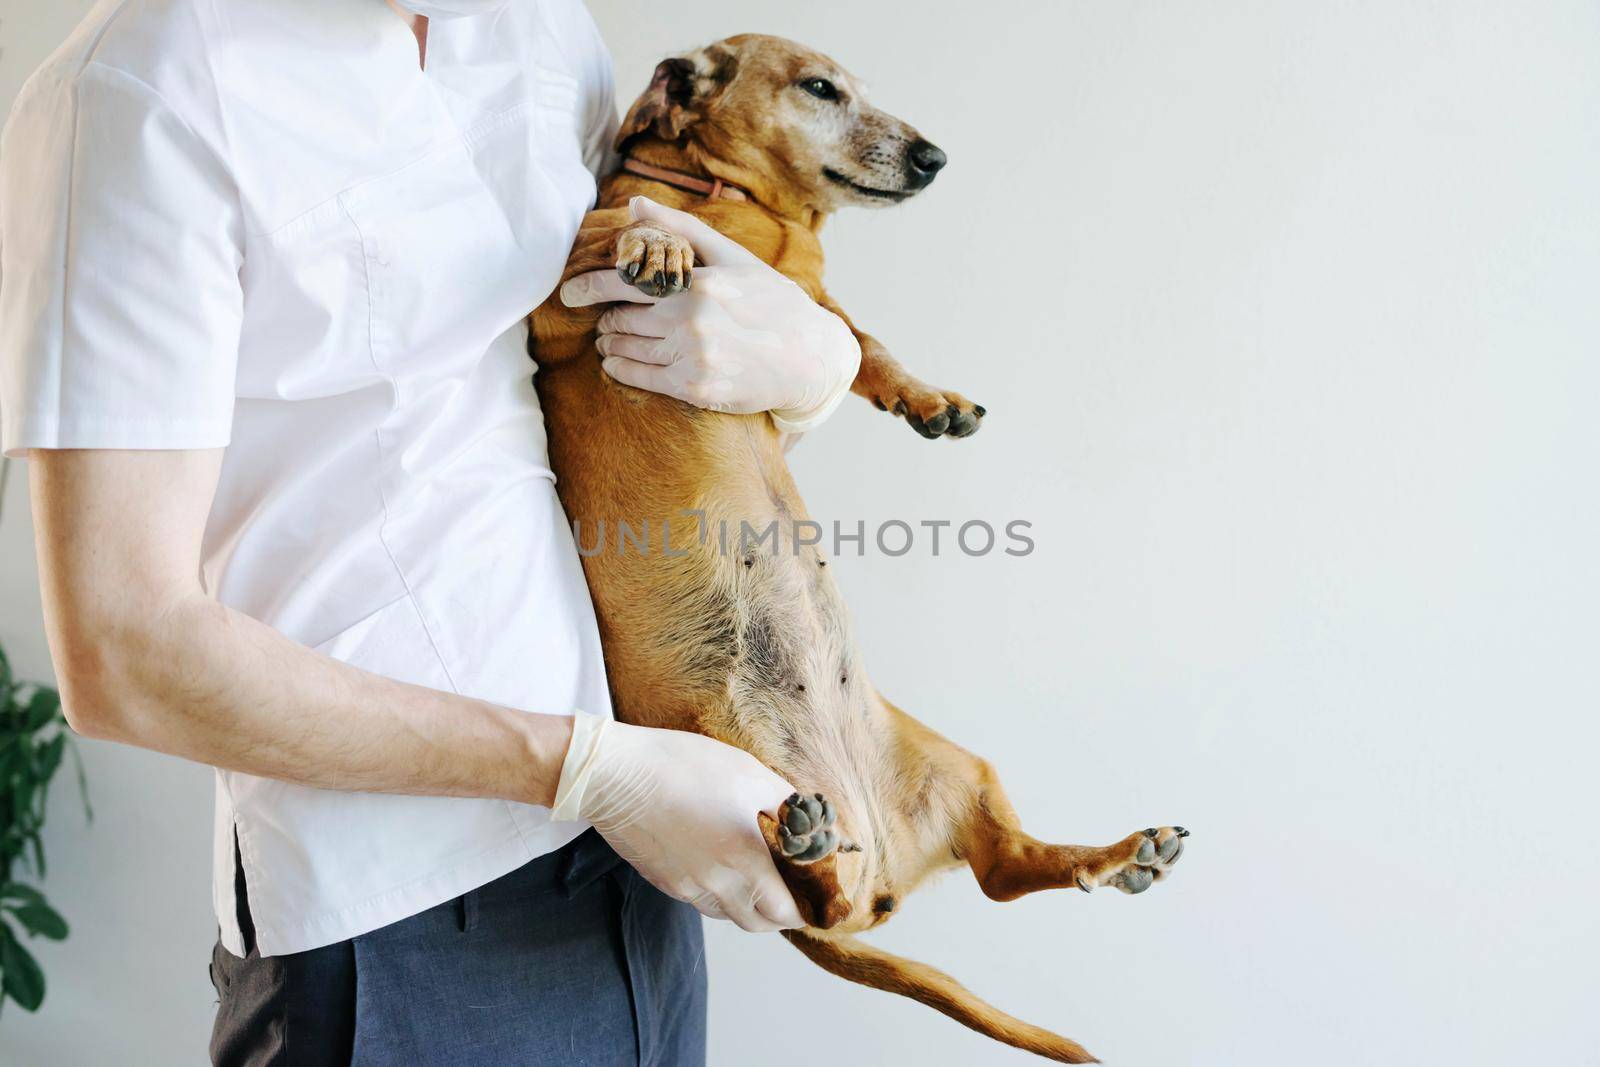 The veterinarian examines the dog. Dog breed Dachshund at a reception in a veterinary clinic.